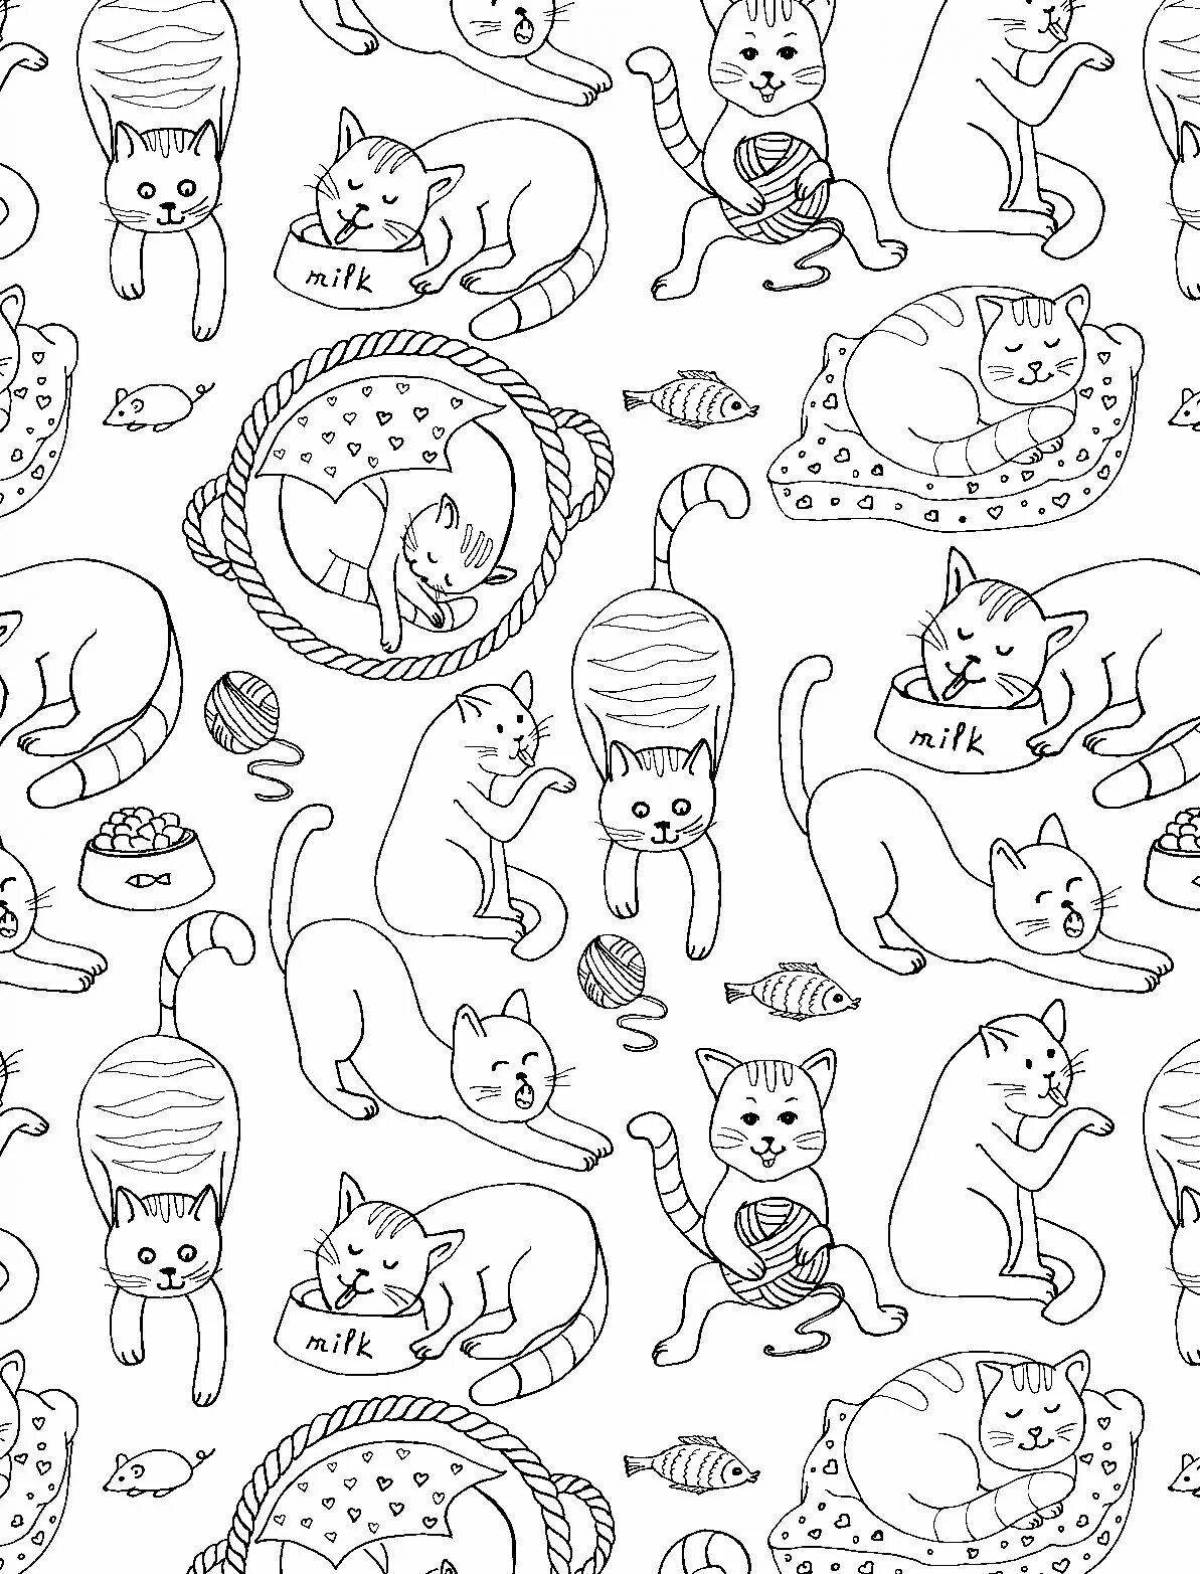 Cute coloring pages with small cats for stickers